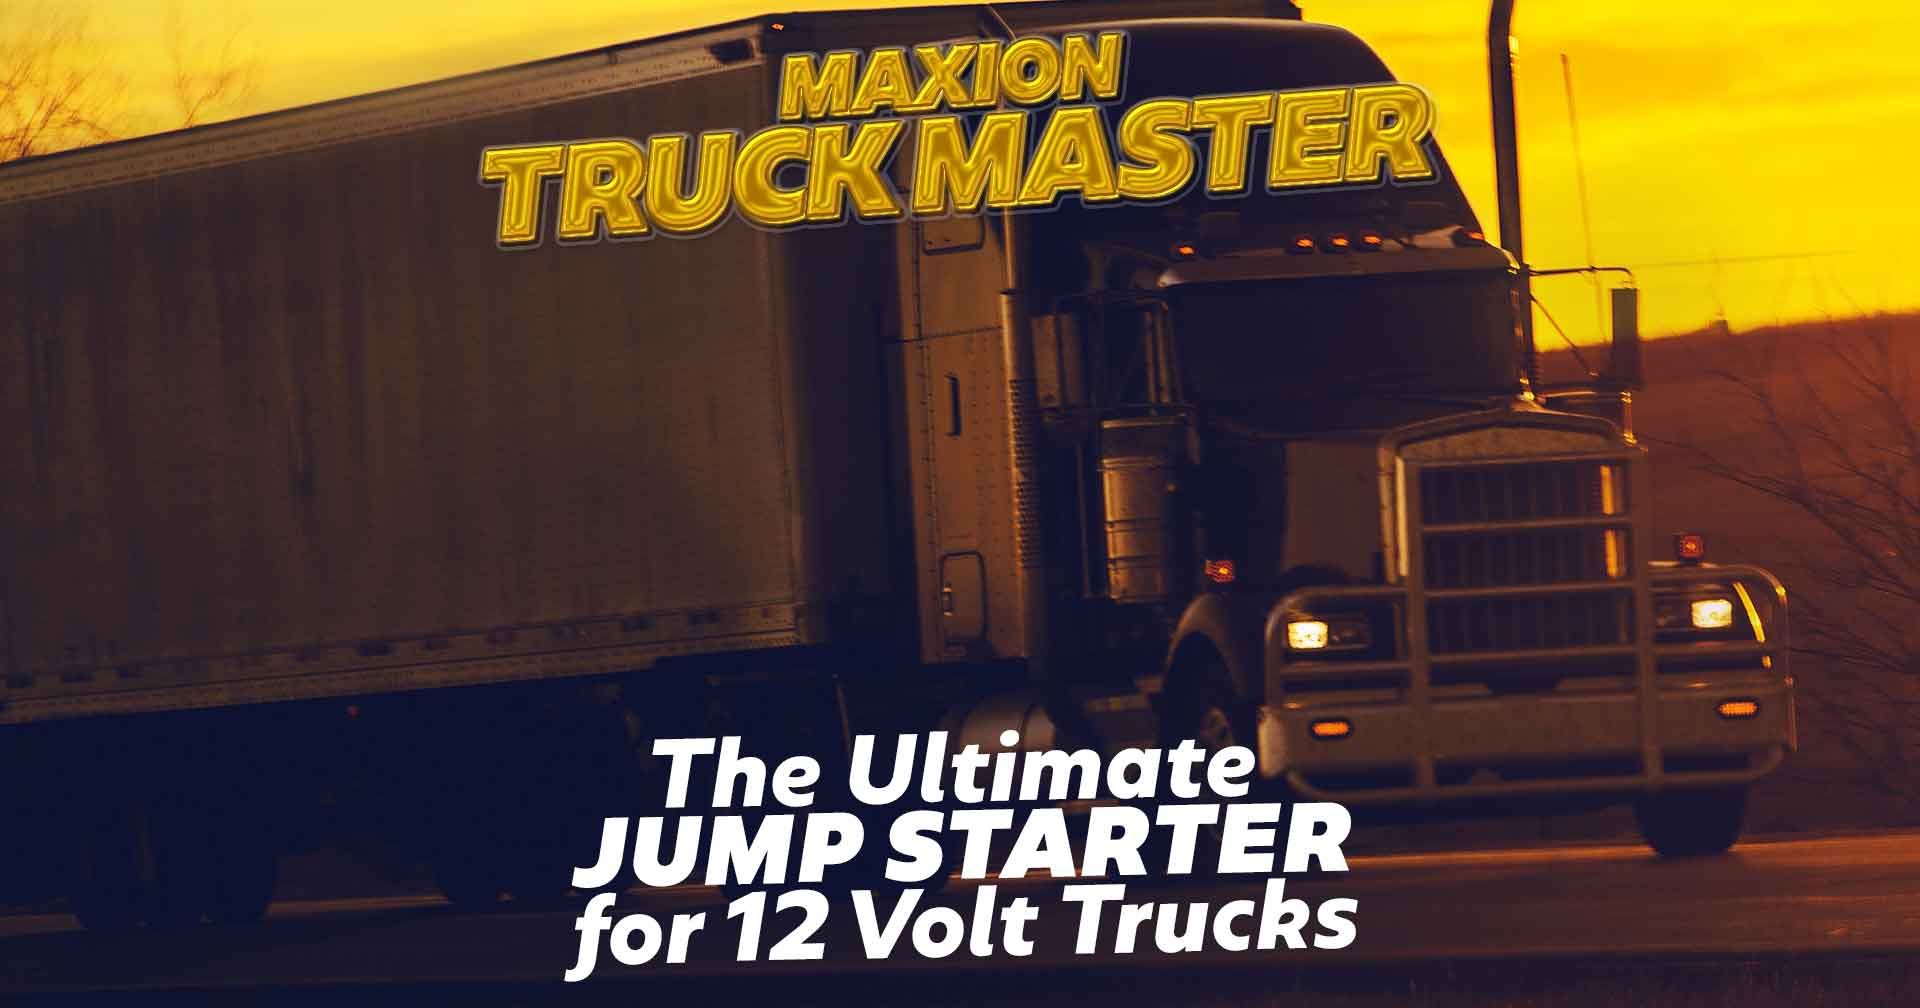 Maxion Truck Master: The Ultimate Jump Starter for 12 Volt American Trucks